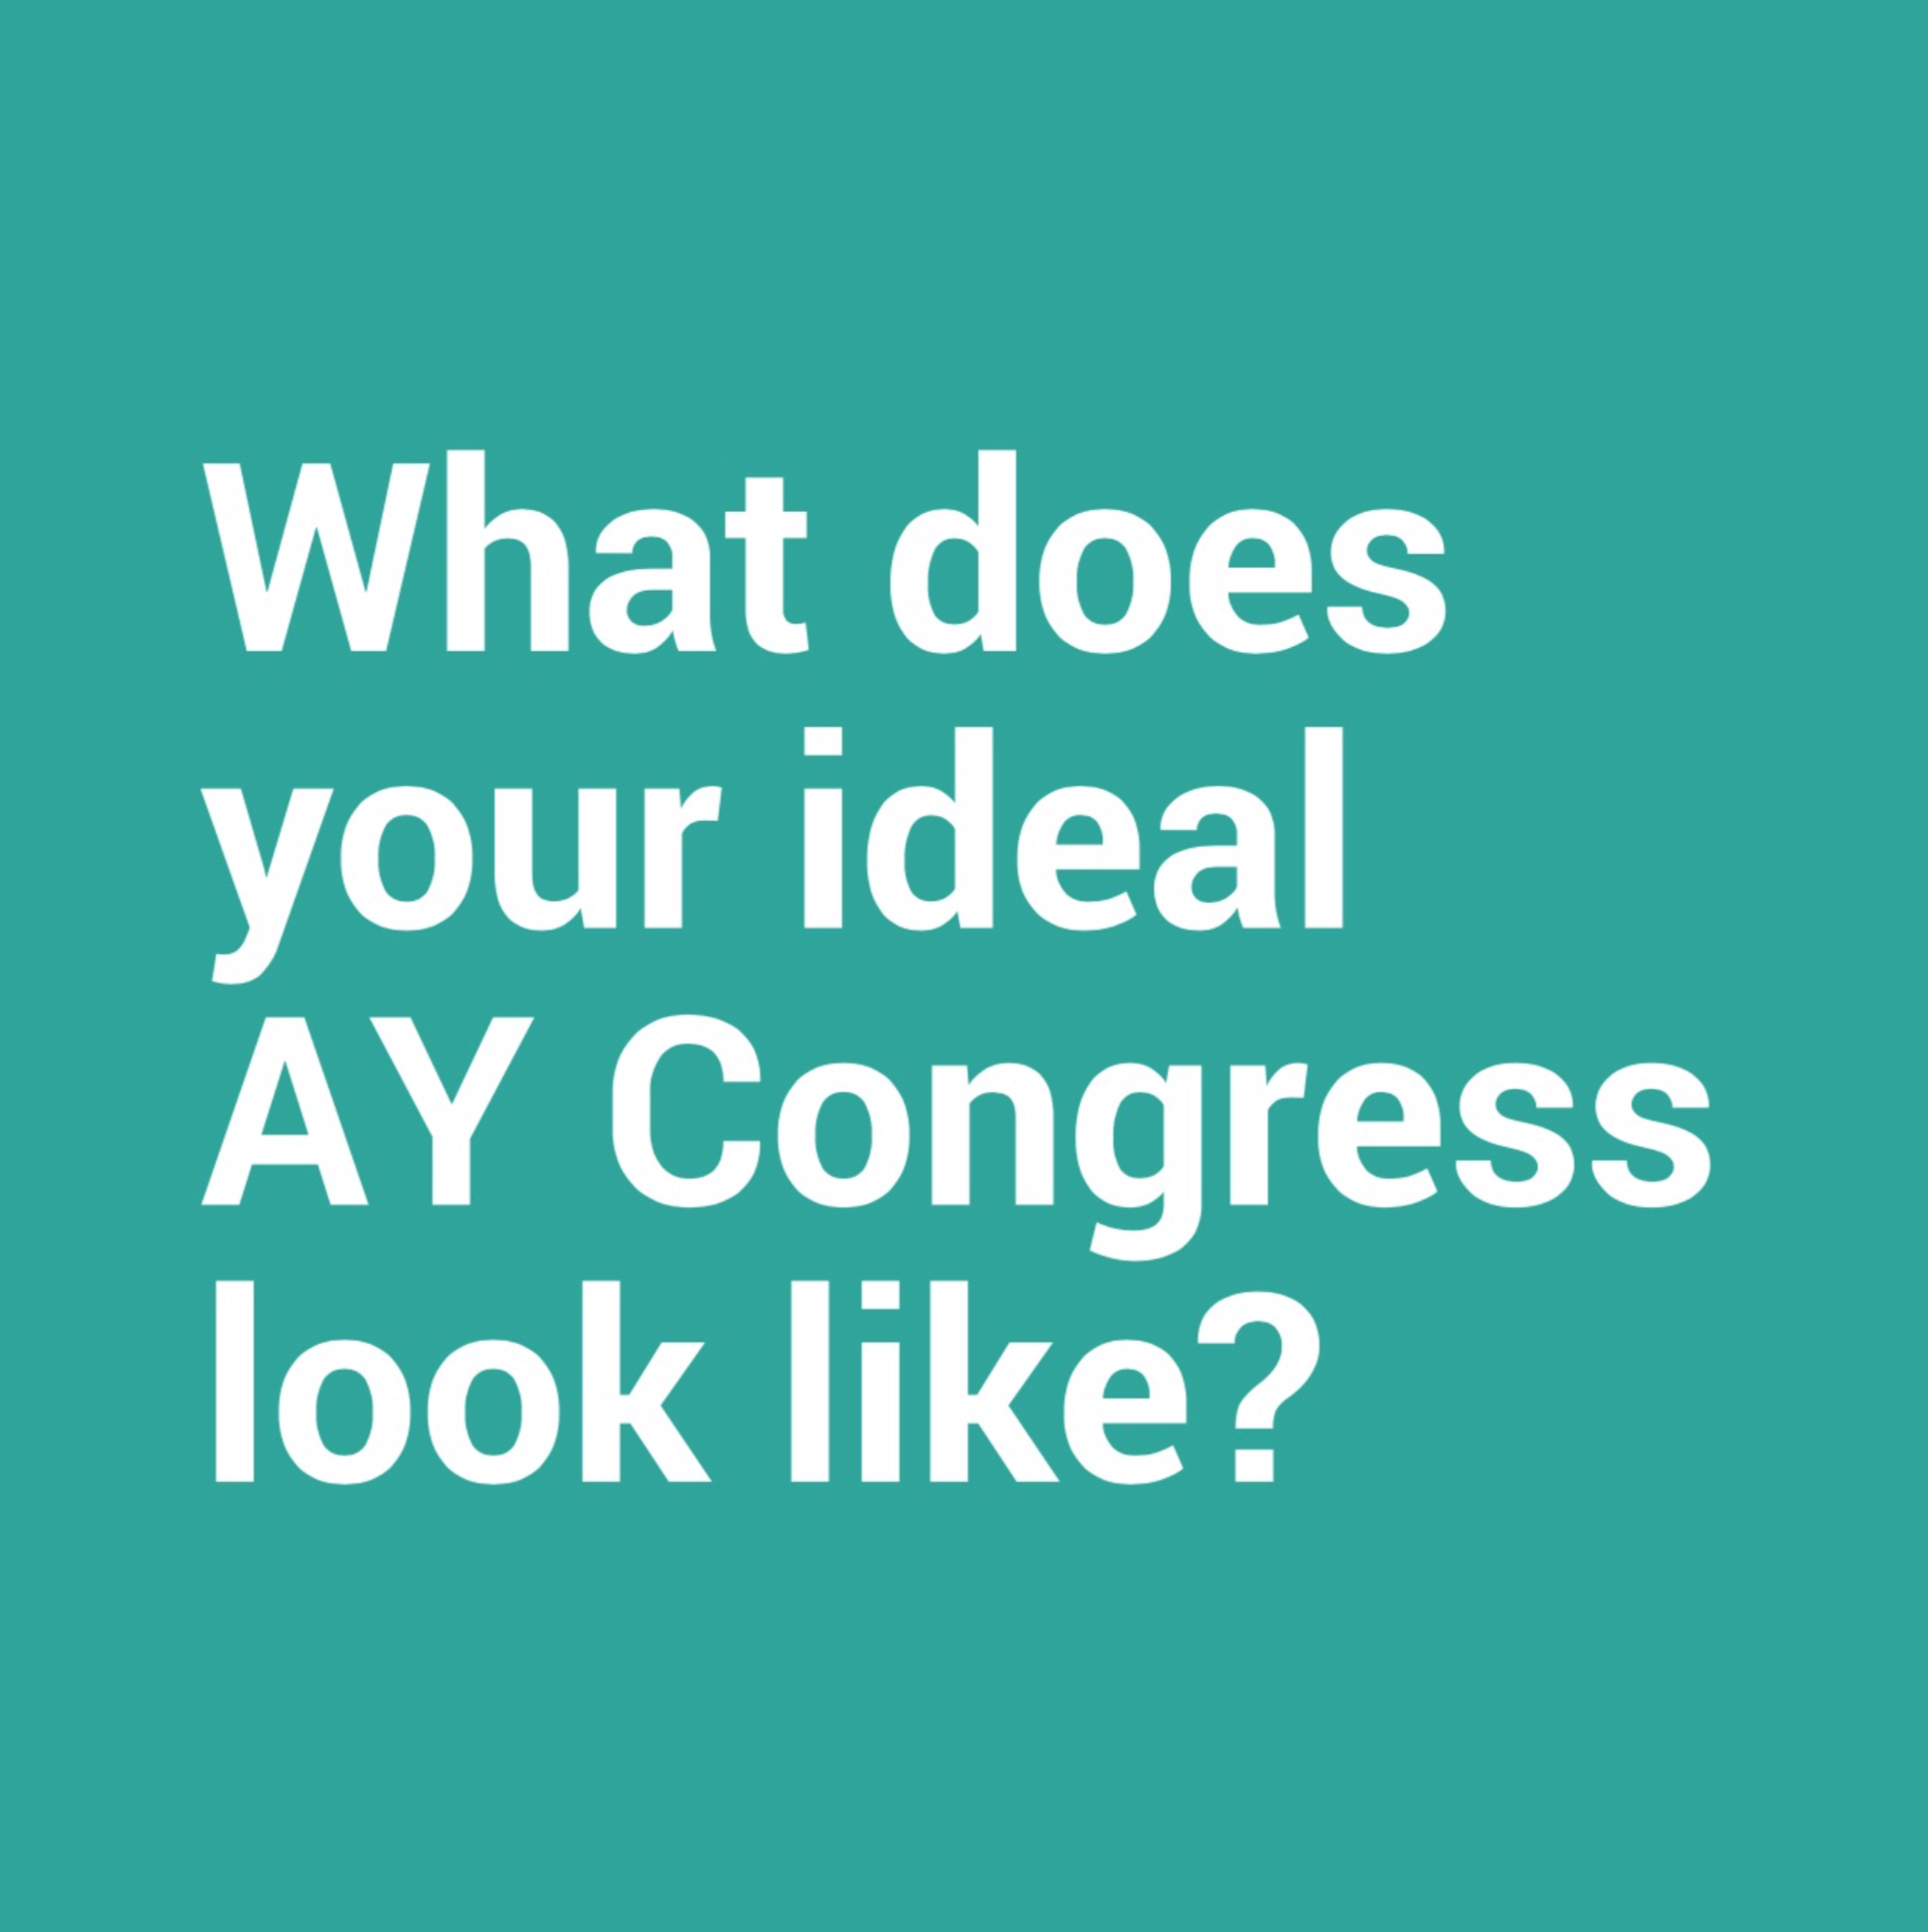 What does your ideal AY Congress look like?